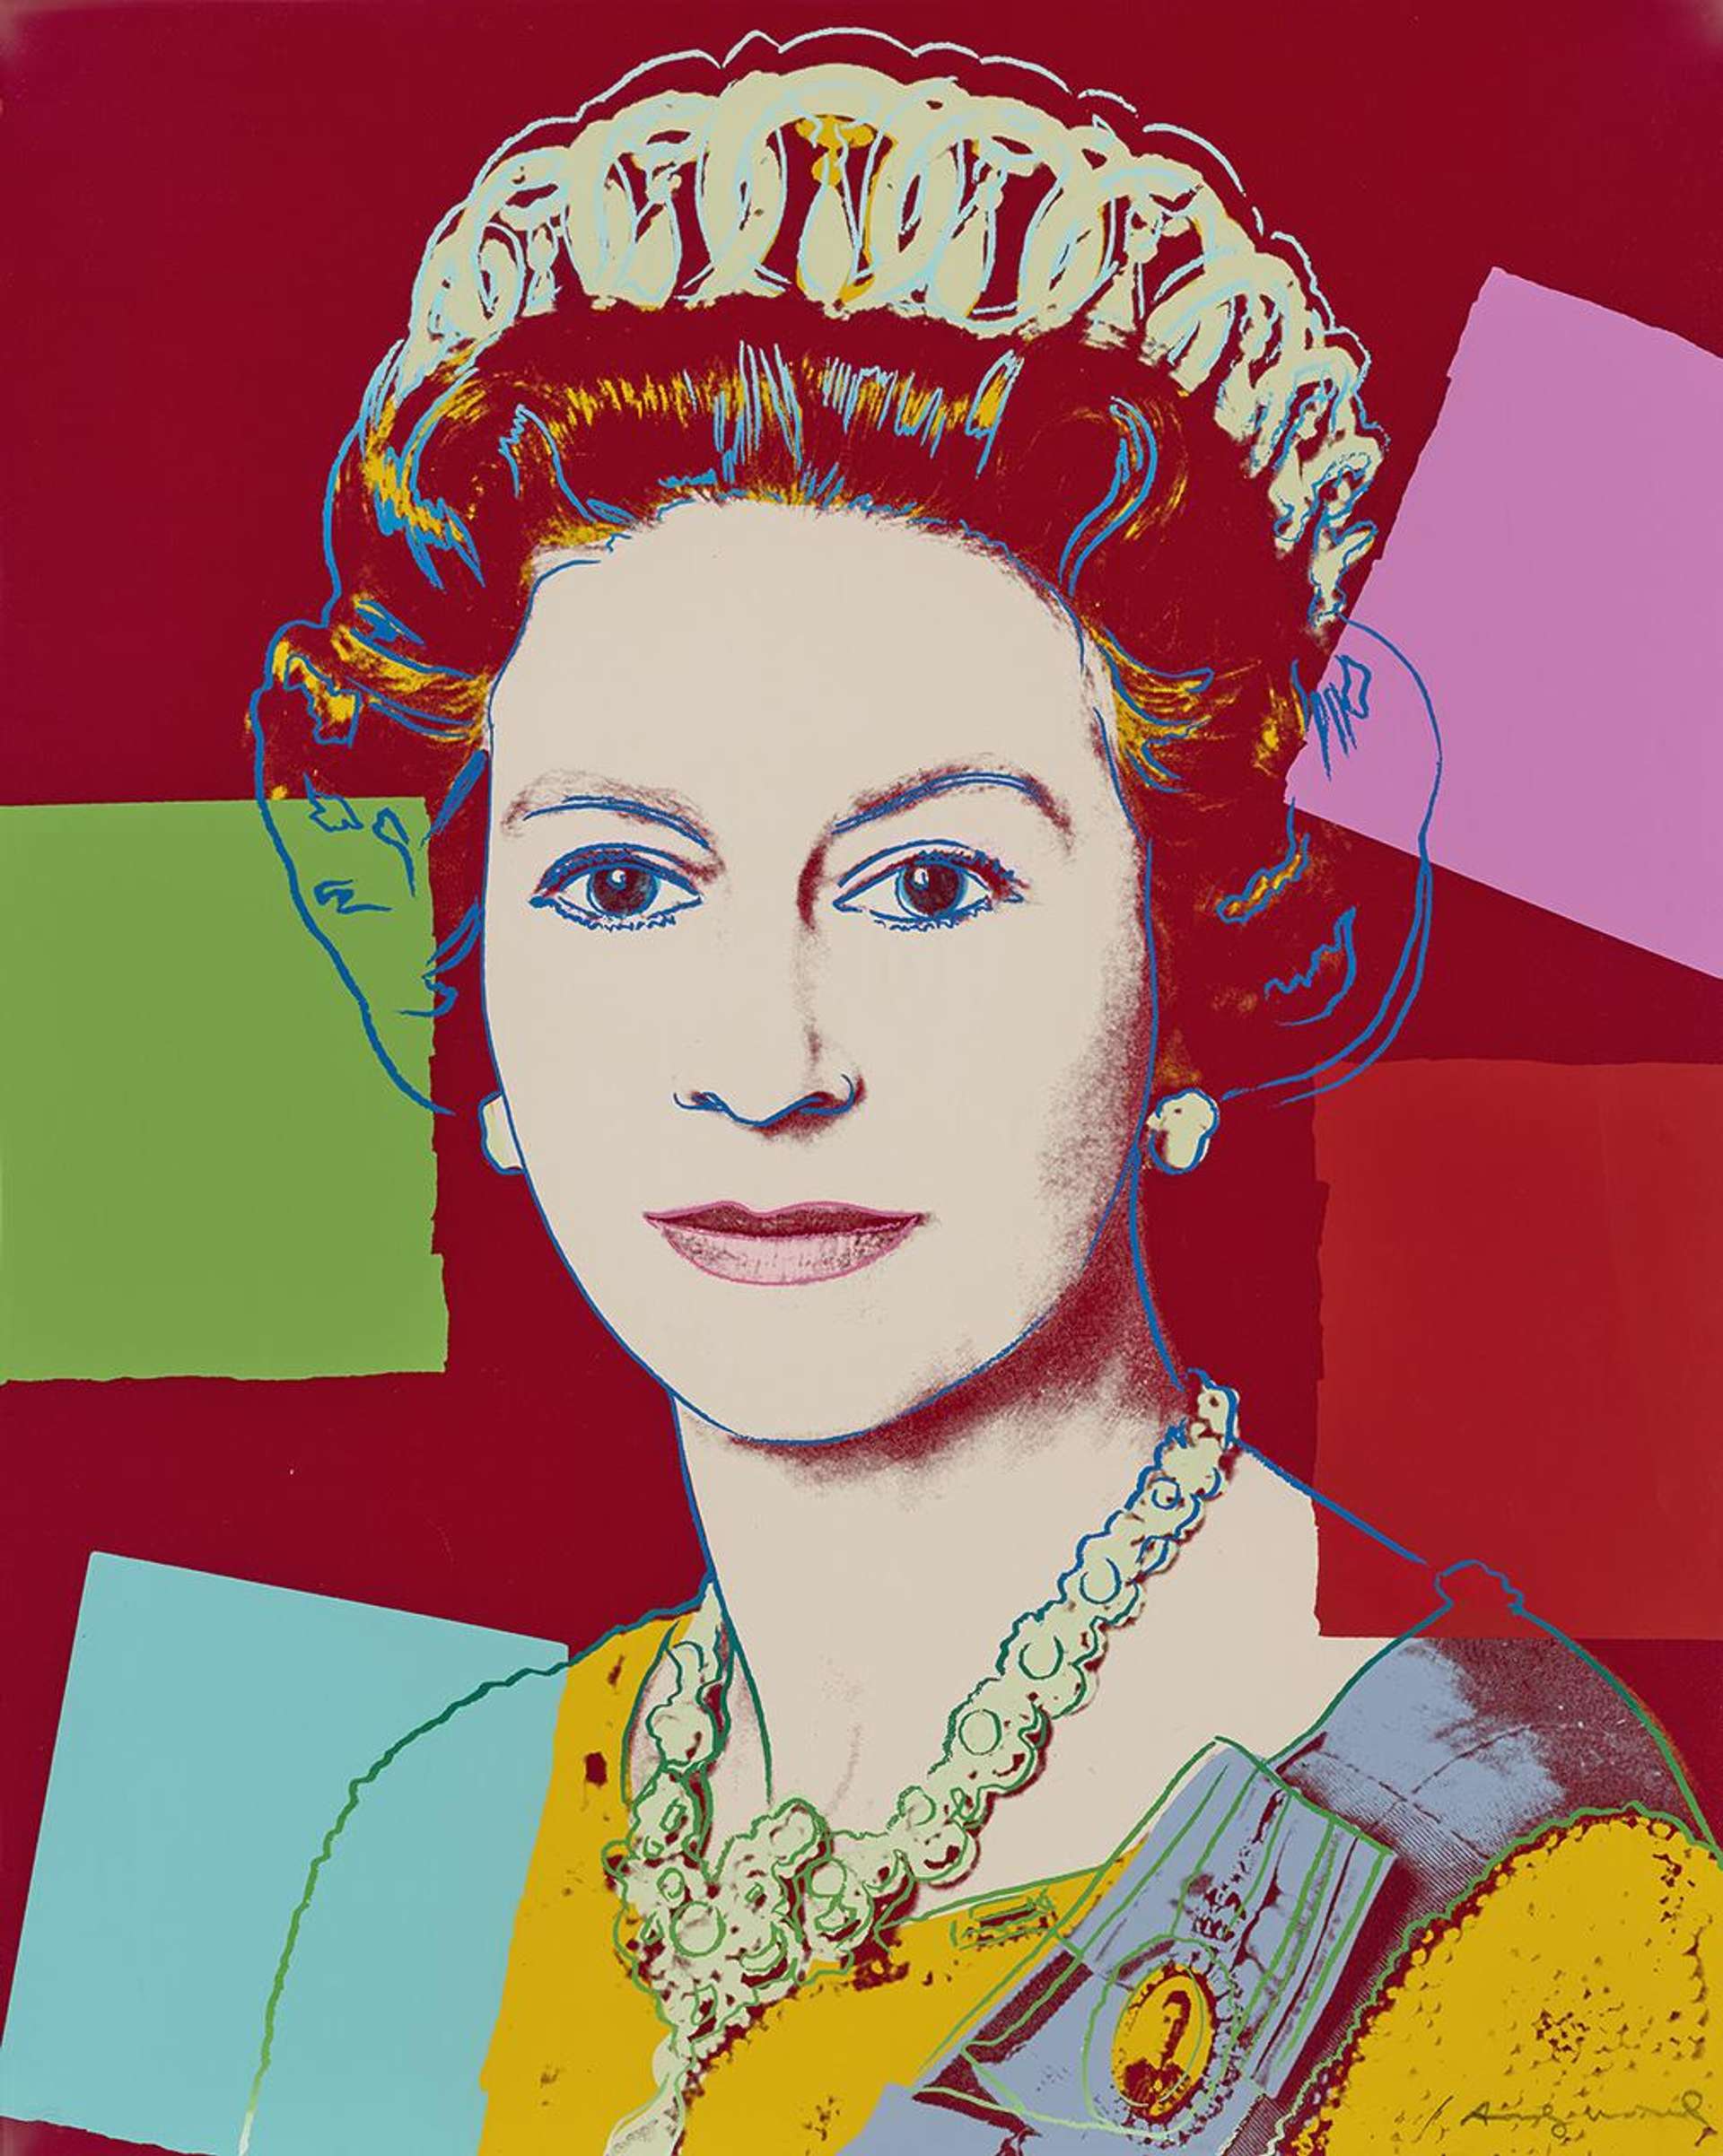 A young Queen Elizabeth II wearing her royal crown and jewellery in the forefront of a red background with accents of light blue, pink, and light green in the style of Pop Art.